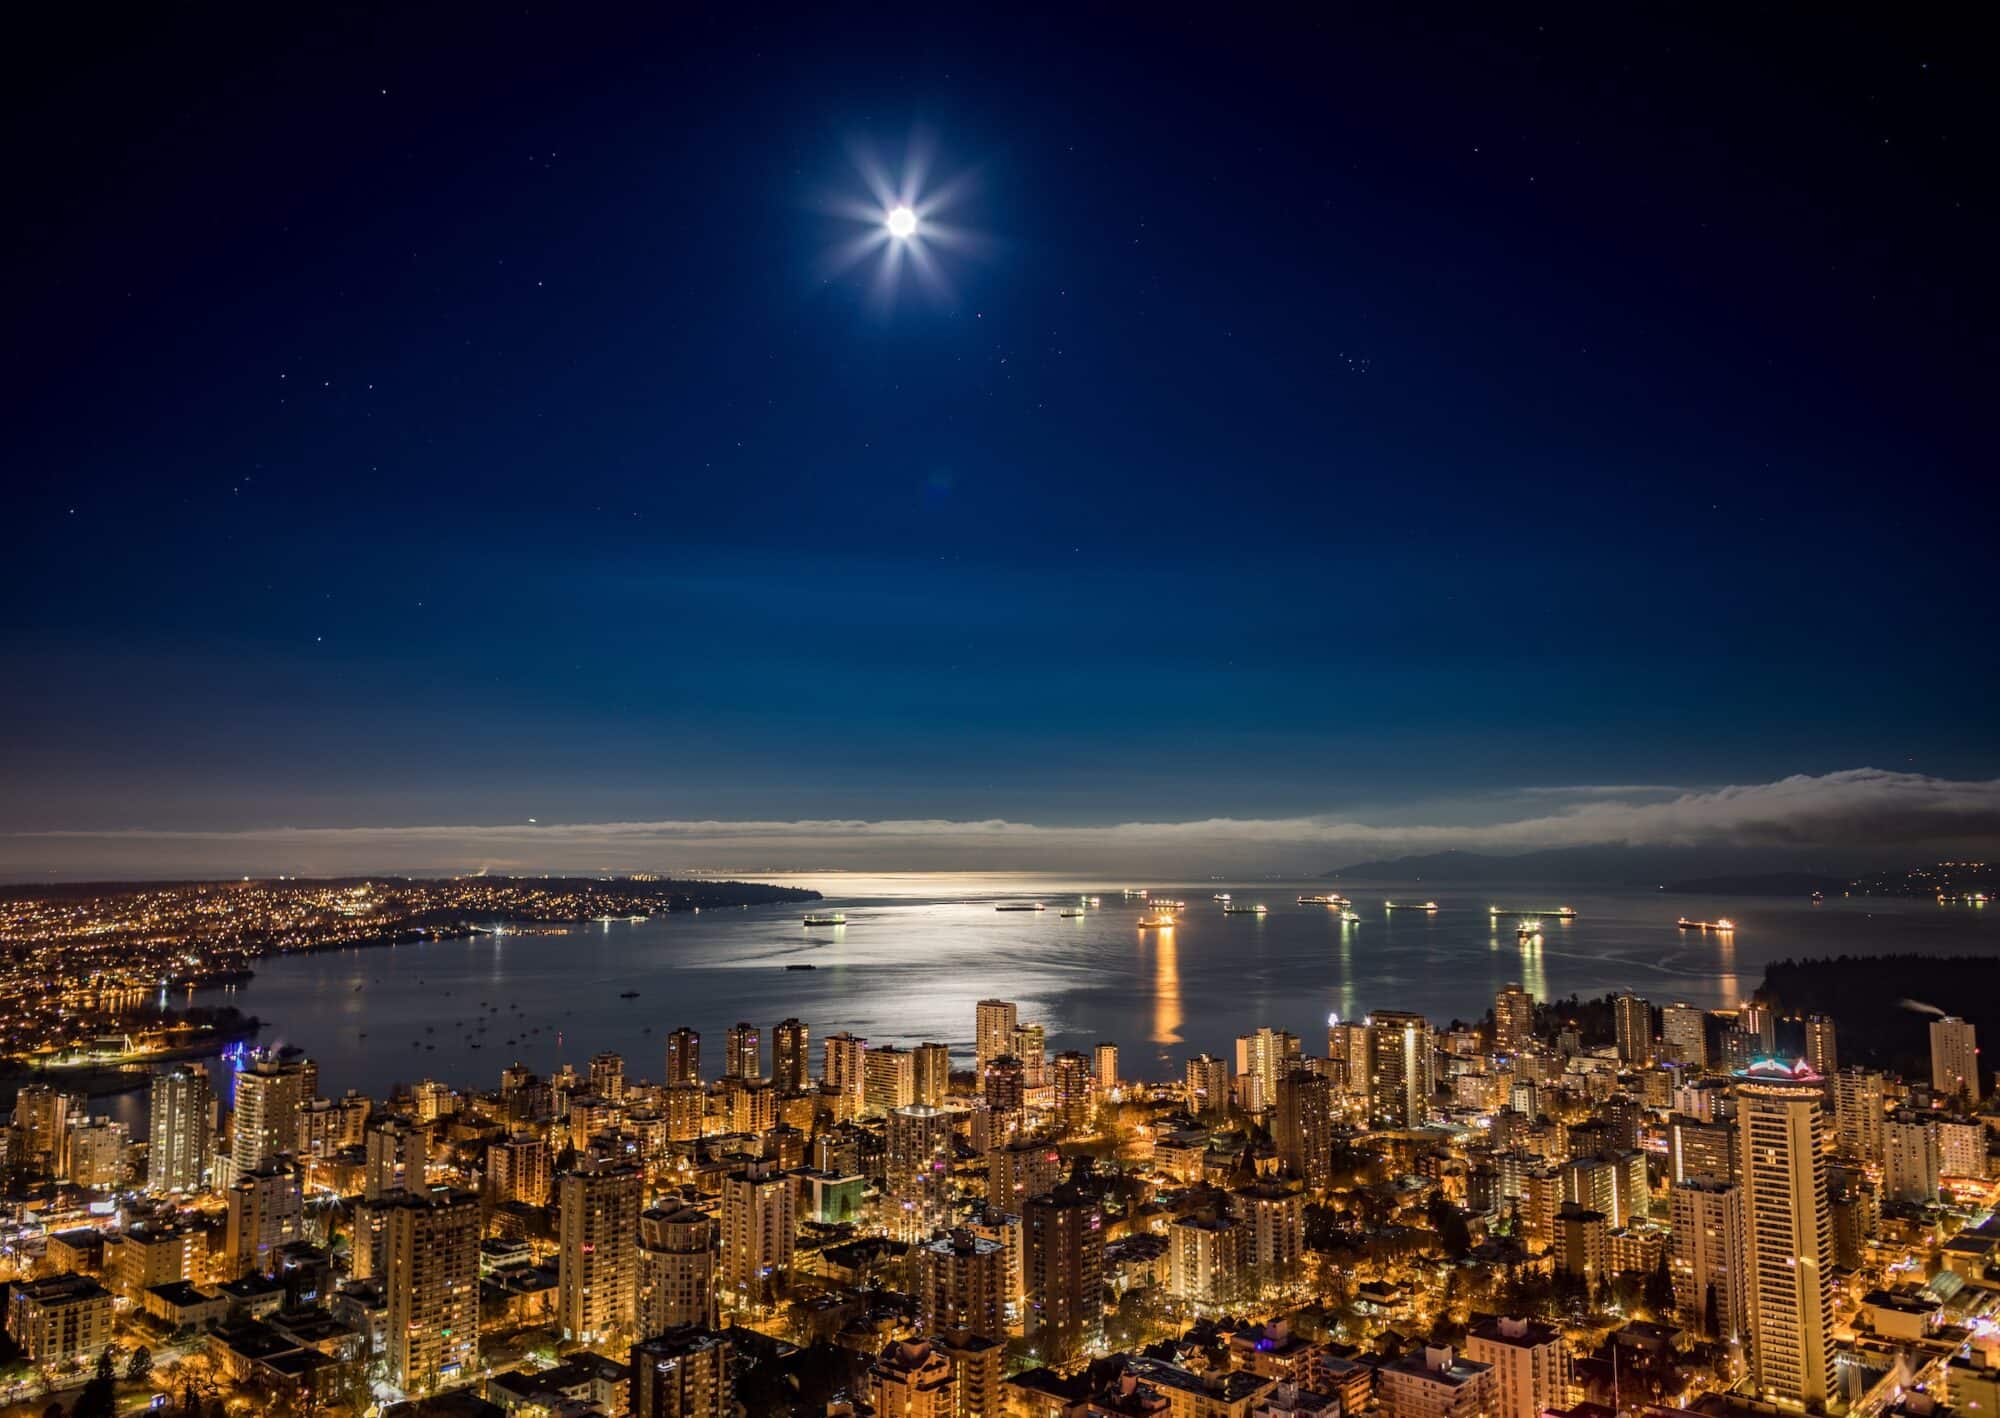 A view of downtown Vancouver lit up a night under moonlight looking over Burrard Inlet.